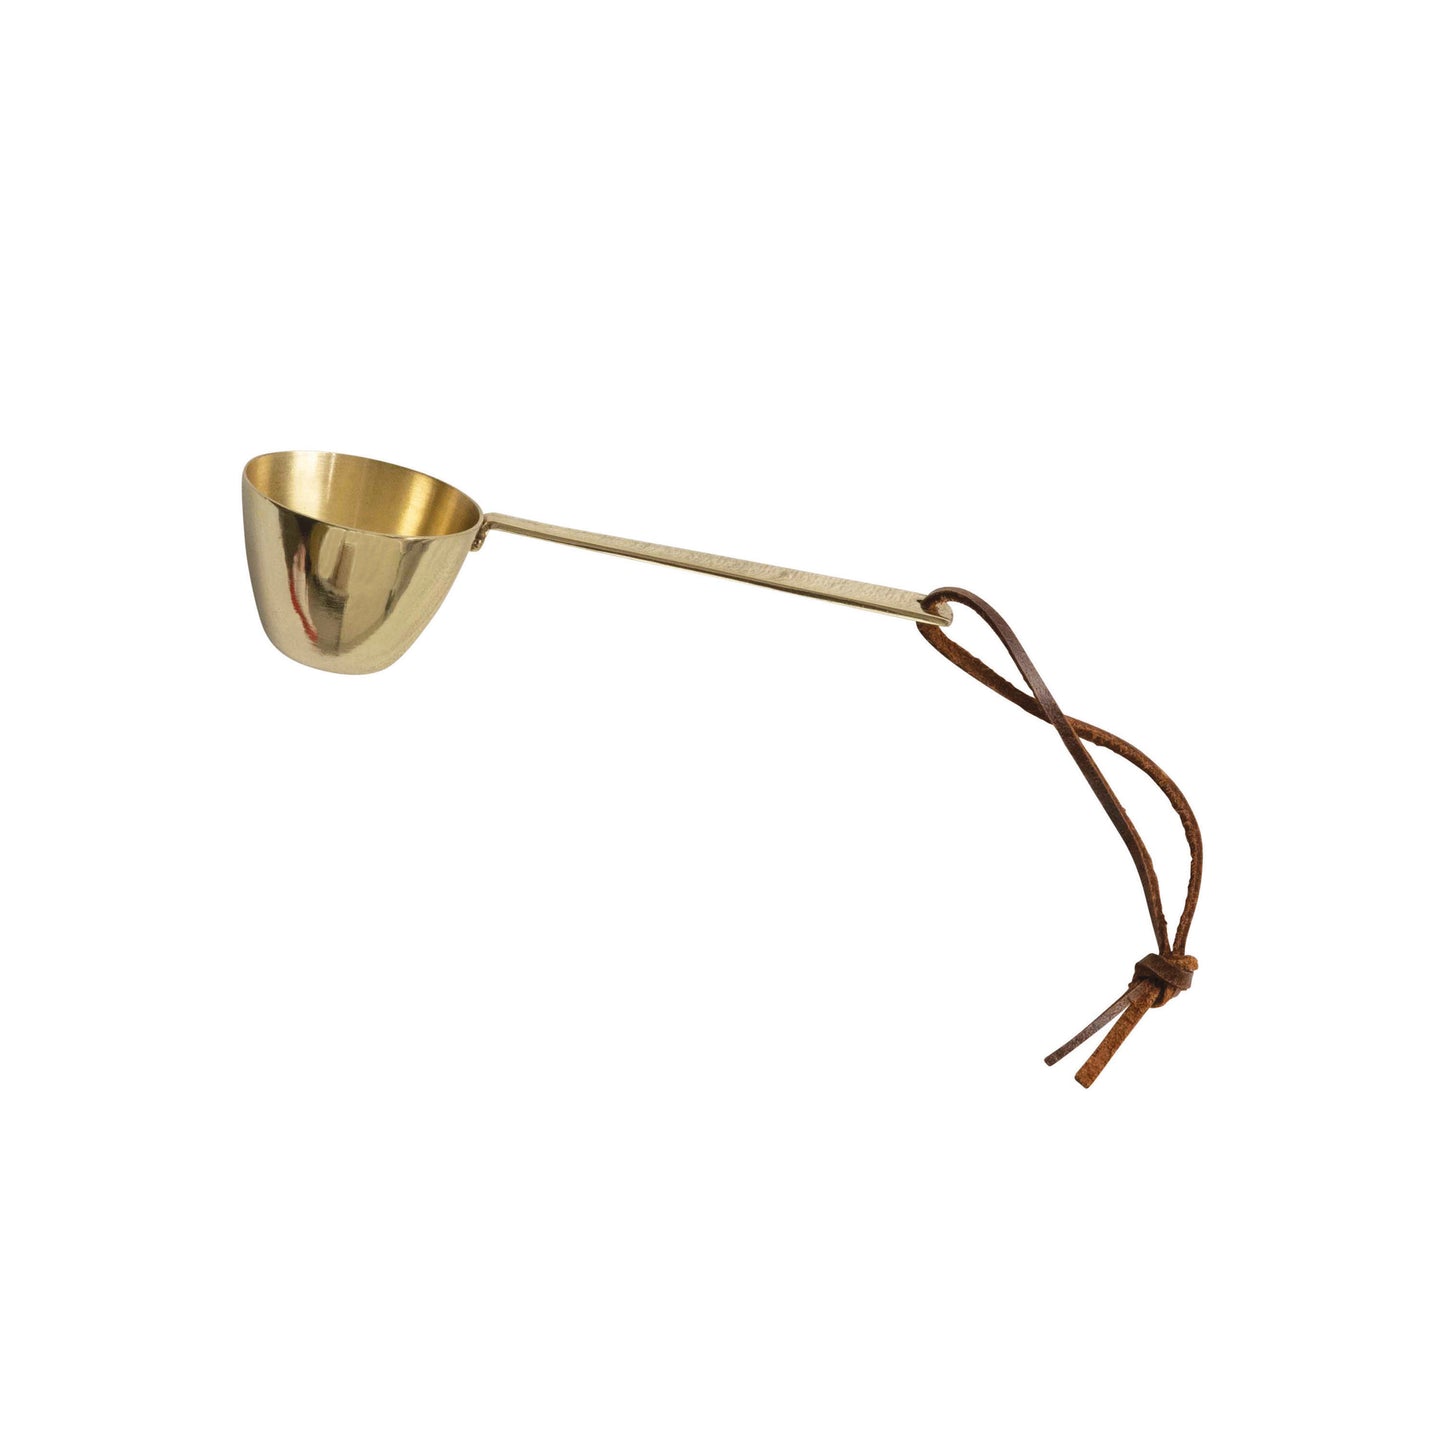 Load image into Gallery viewer, Gold Metal Scoop with Leather Tie
